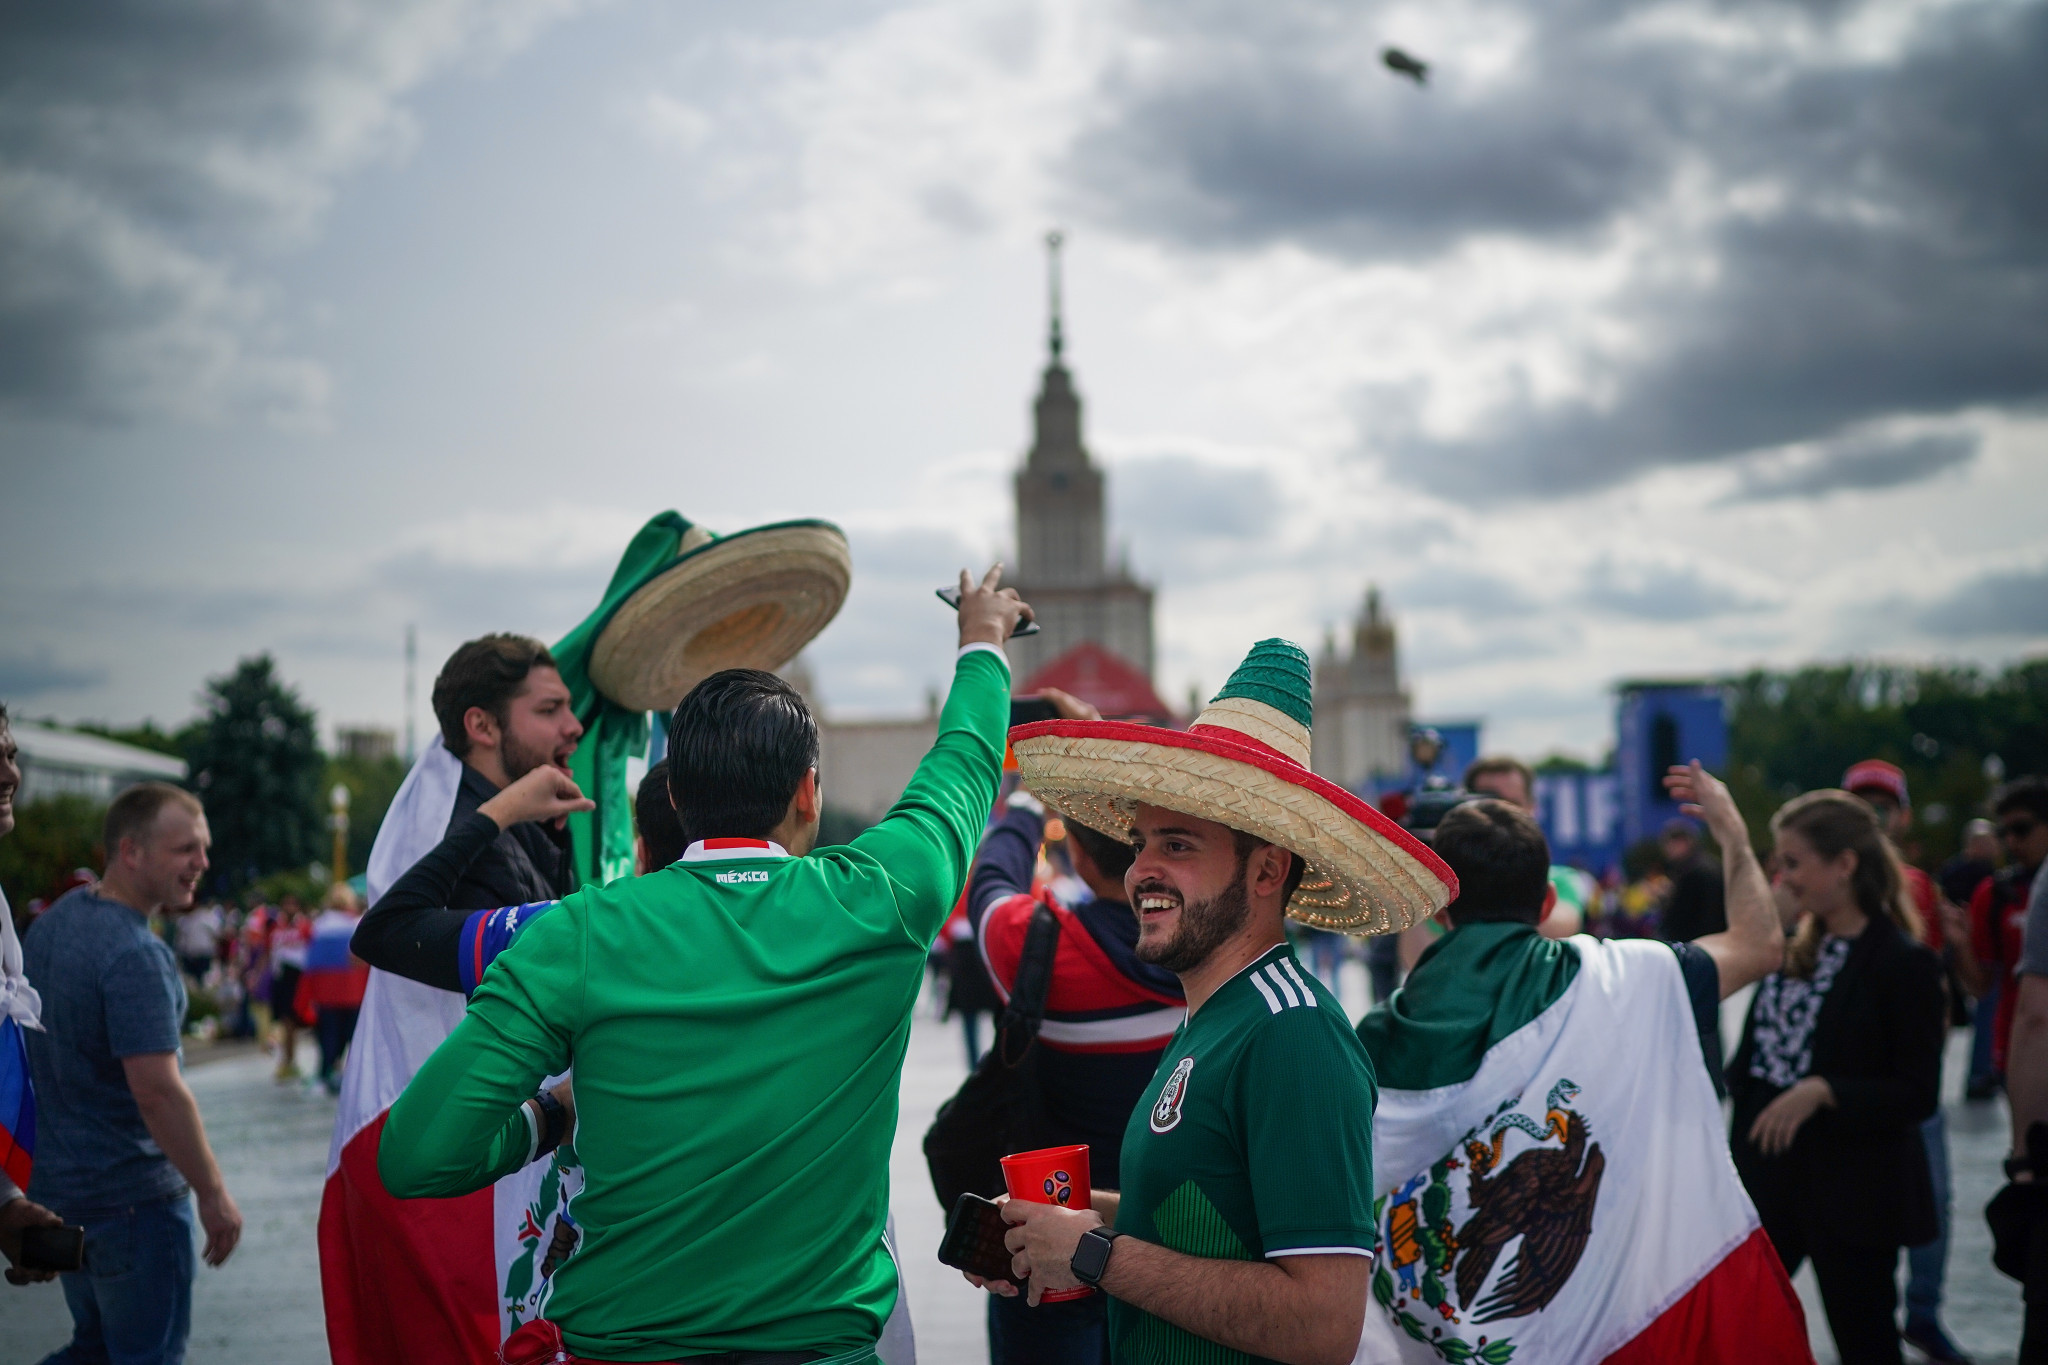 At least seven people, including Mexican World Cup fans, were injured in the crash ©Getty Images